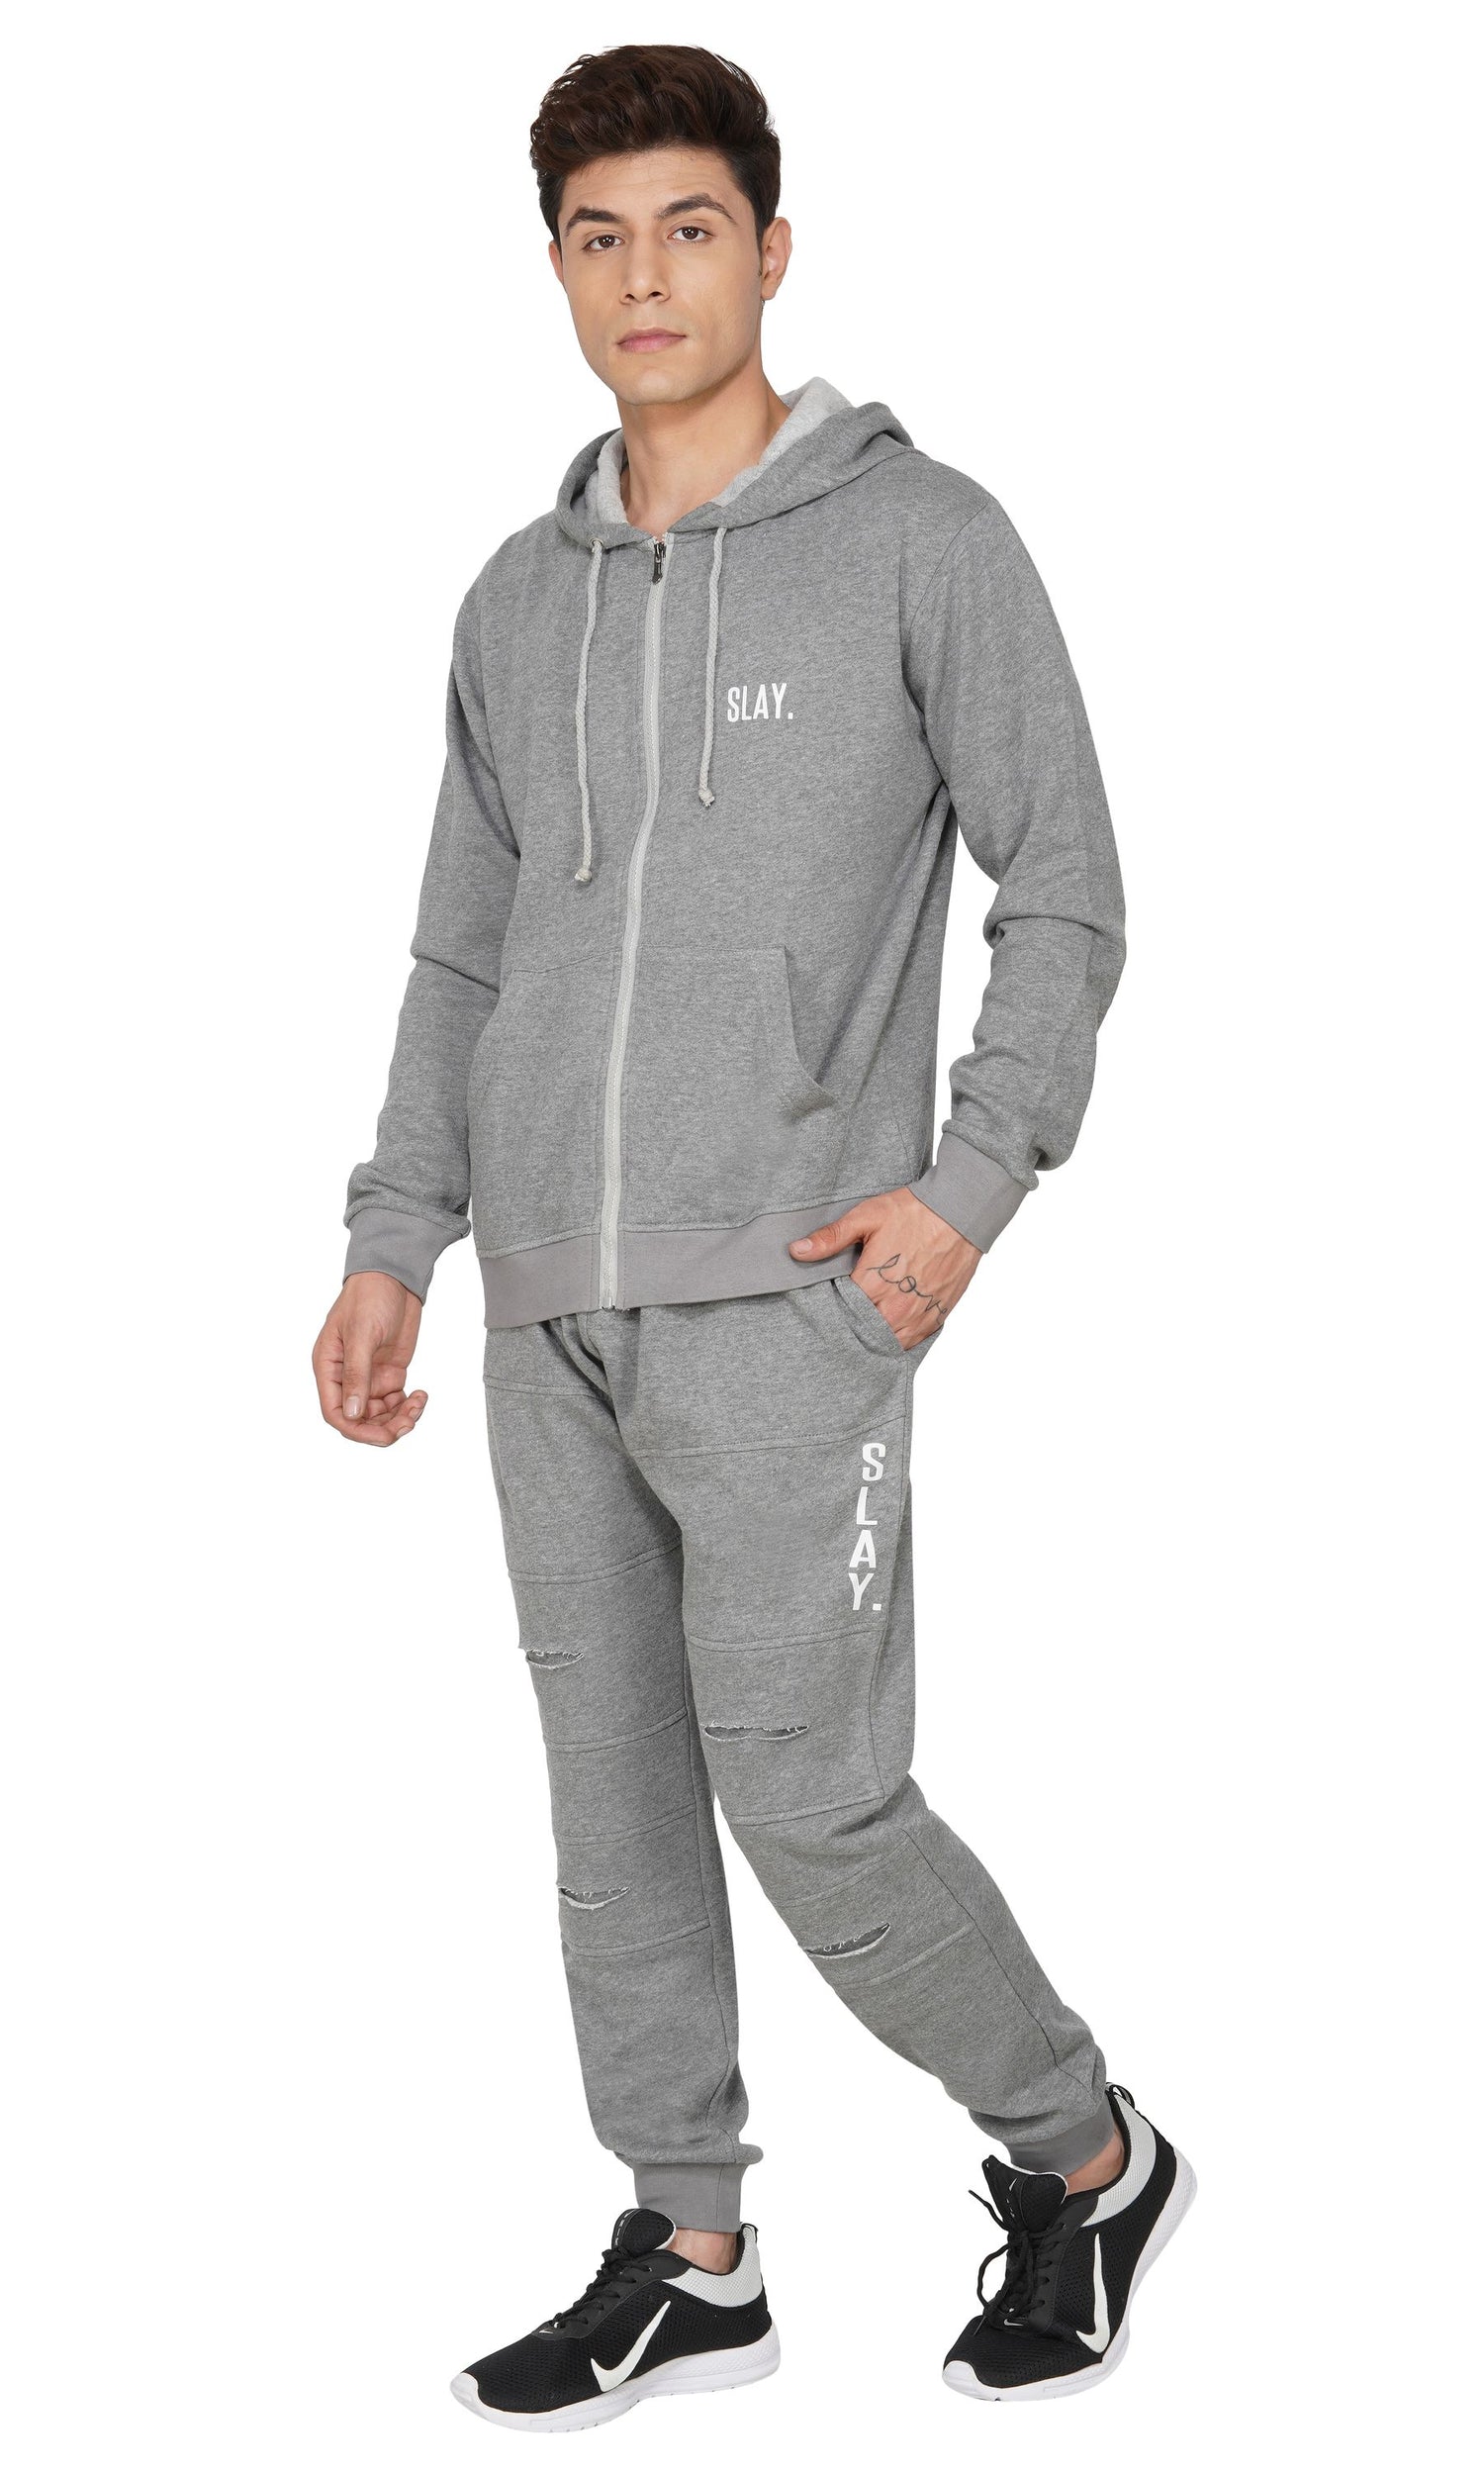 SLAY. Men's BALLER Edition Tracksuit For Workout and Casual Wear-clothing-to-slay.myshopify.com-Tracksuit